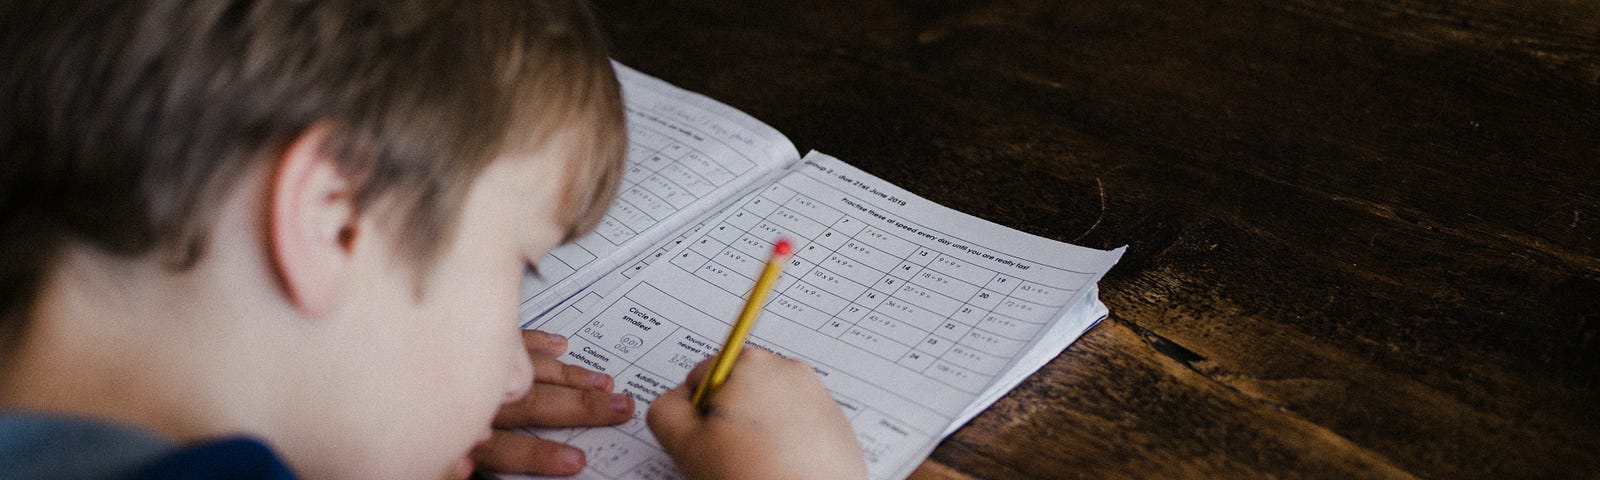 Child writing on activity book